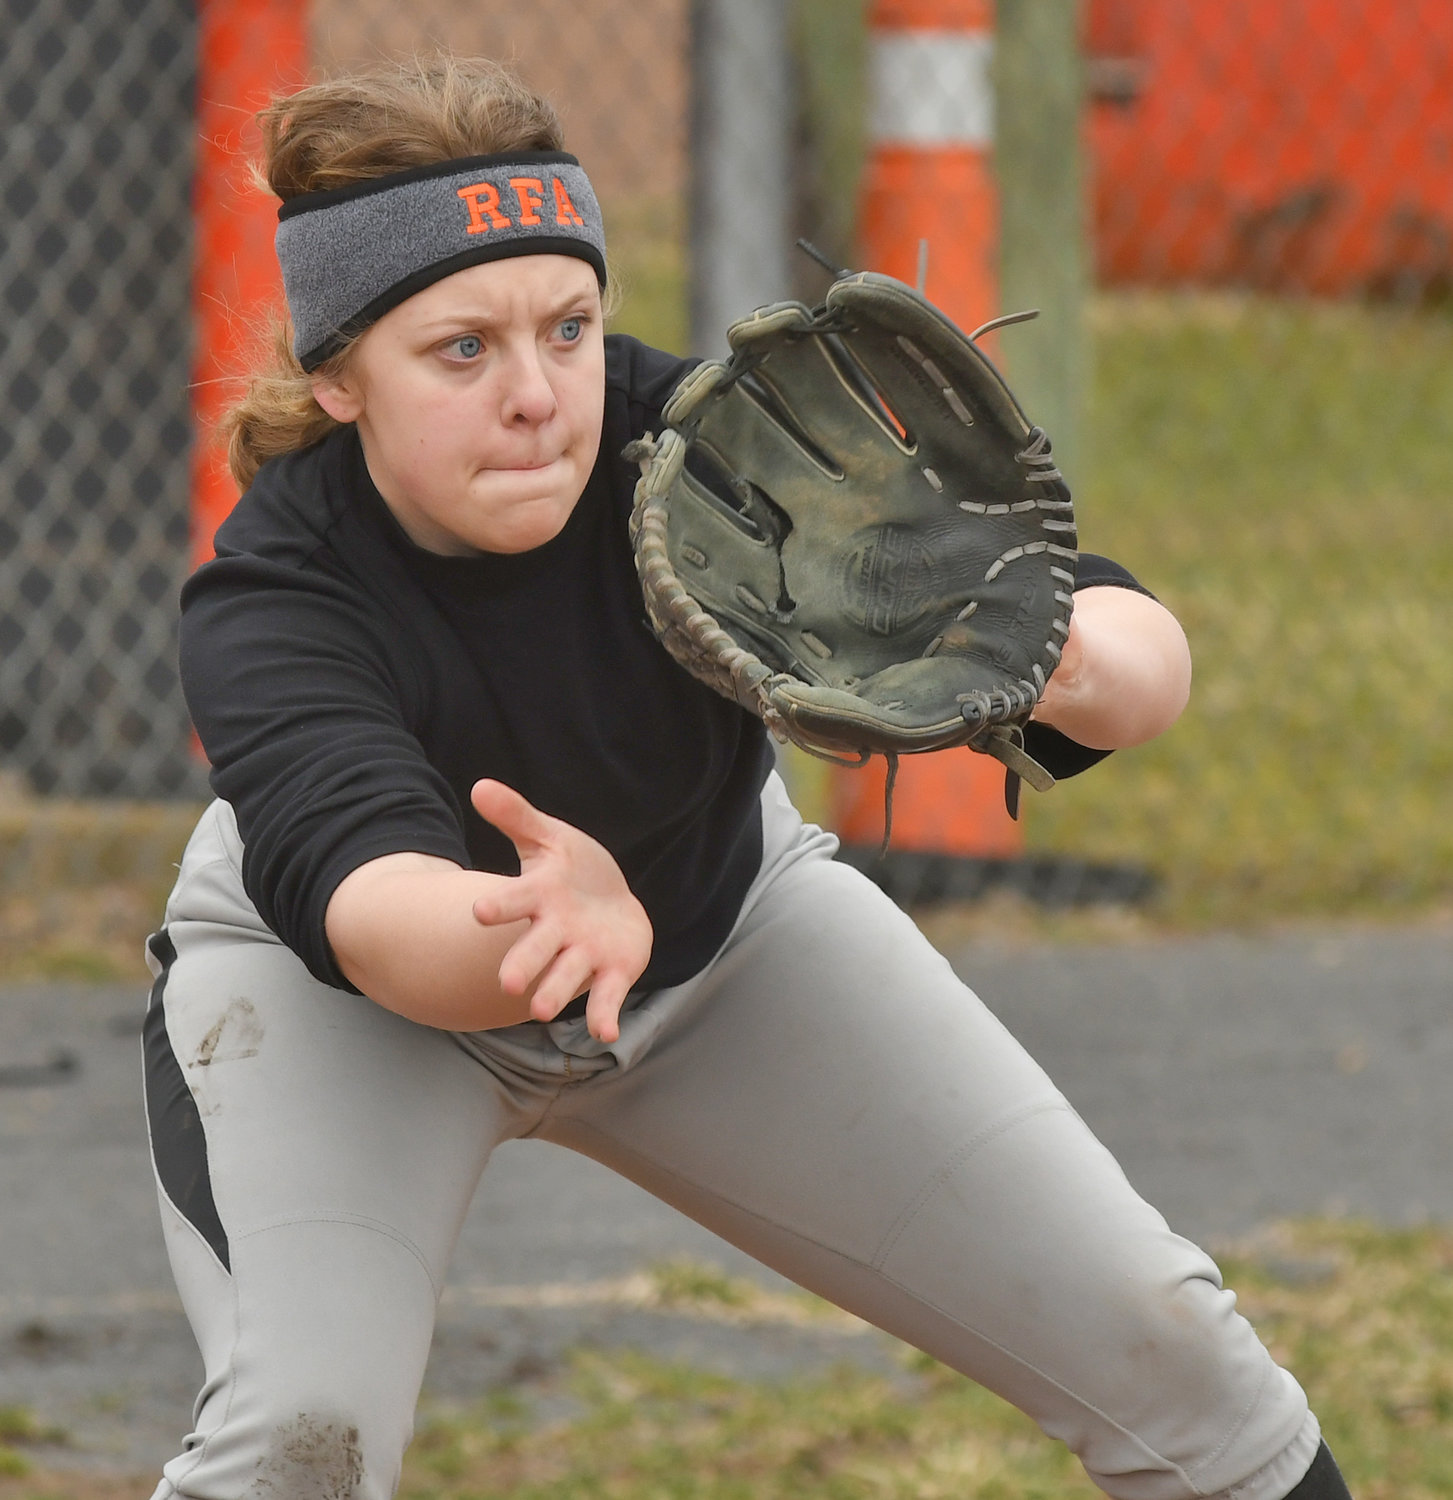 DIALED IN — Rome Free Academy senior Laina Beer awaits a throw during drills at Kost Field earlier this spring as the Black Knights prepared for the softball season. Beer is the team’s primary pitcher and one of many starters the team gets back from last season.